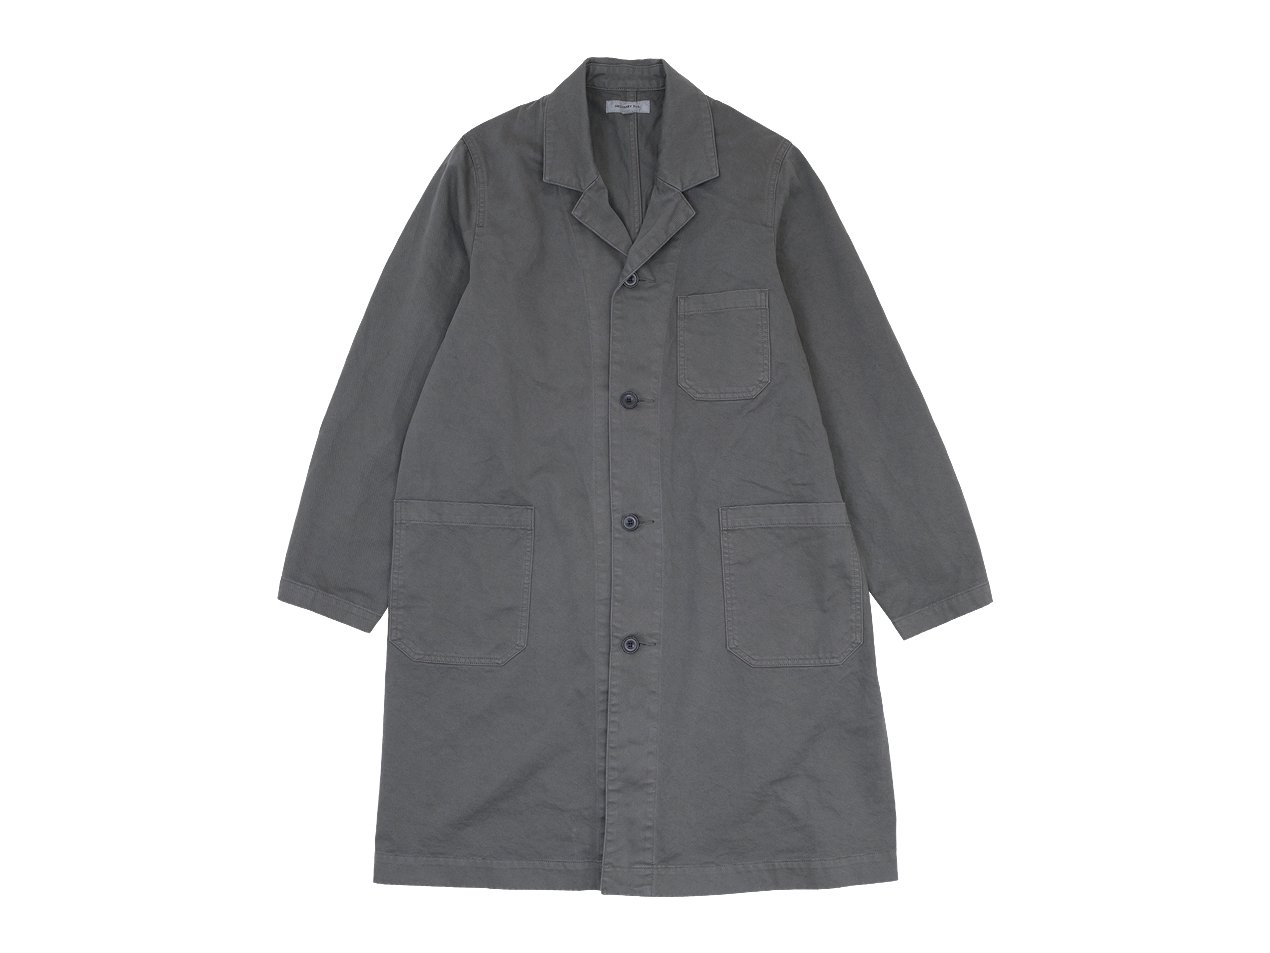 ordinary fits DOCTOR COAT GRAY ordinary fits通販・取扱い rusk